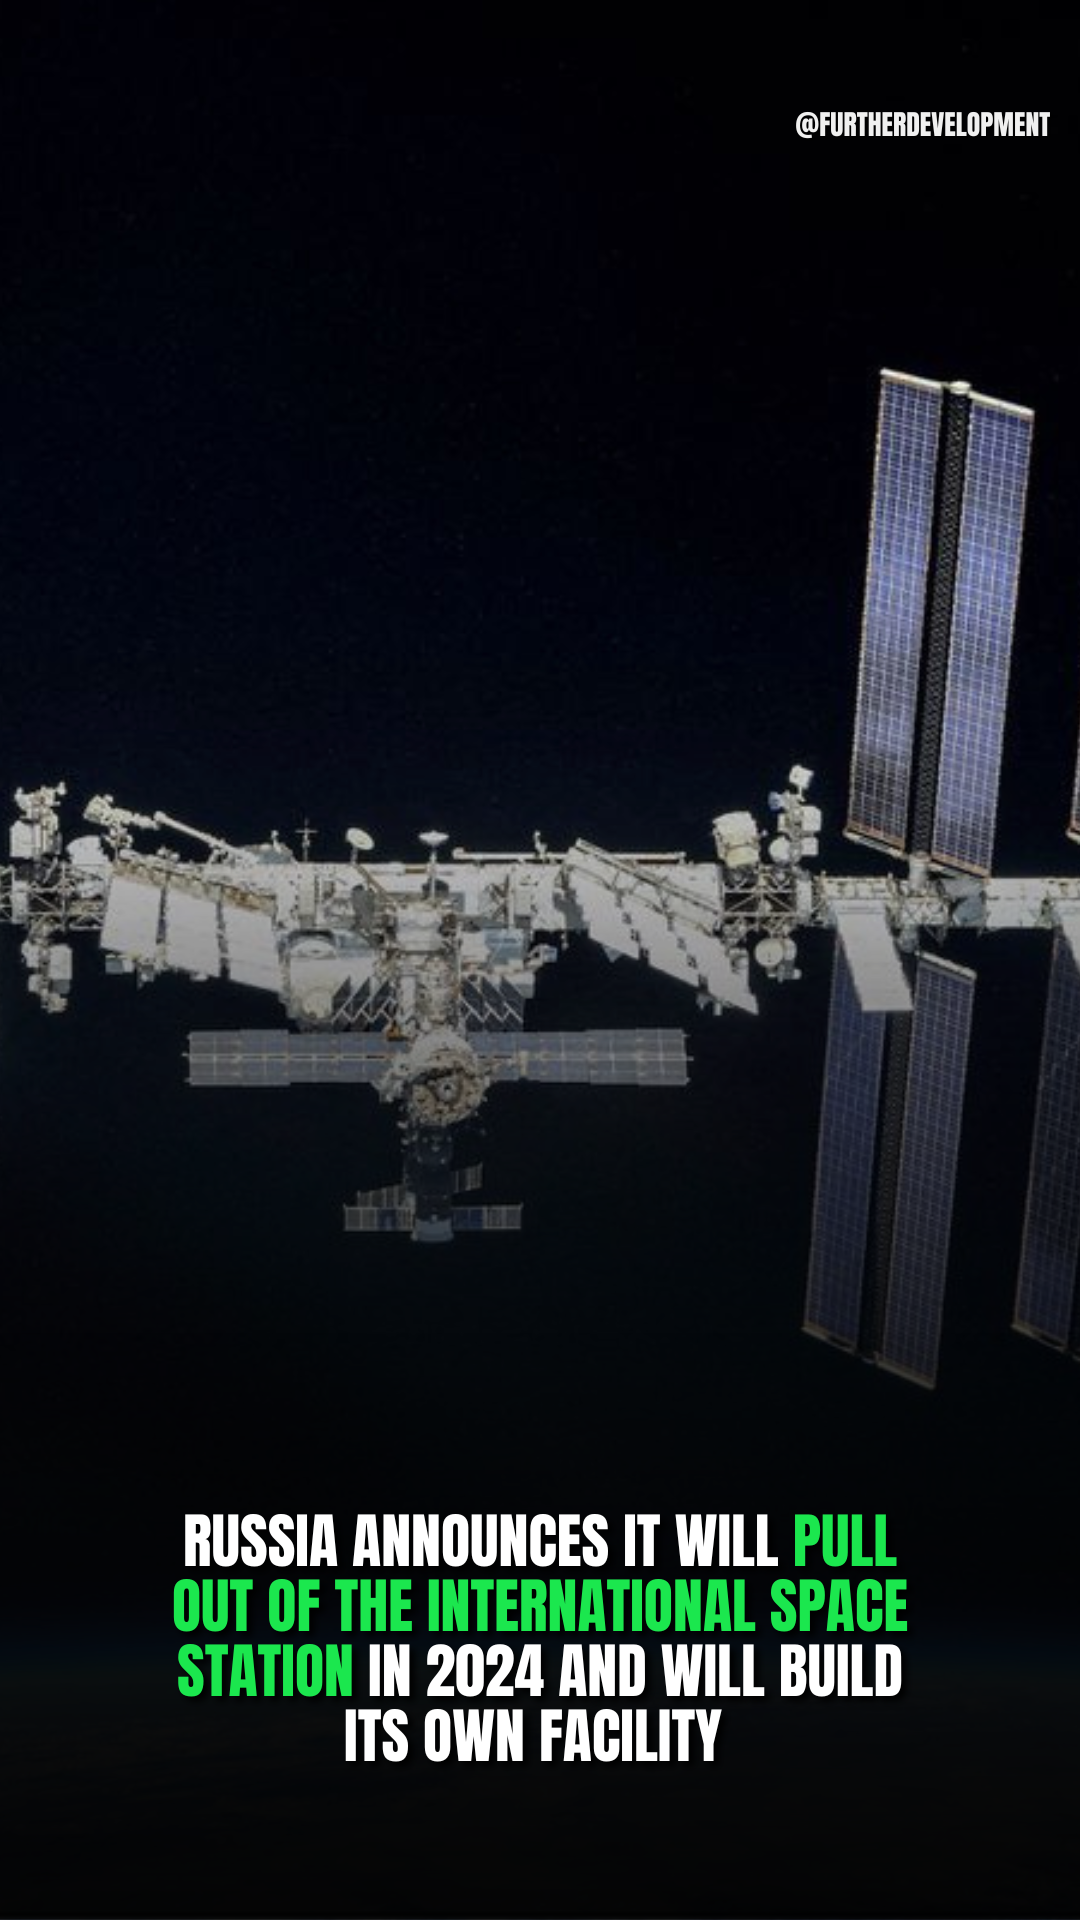 Russia announces it will pull out of the International Space Station in 2024 and will build its own facility